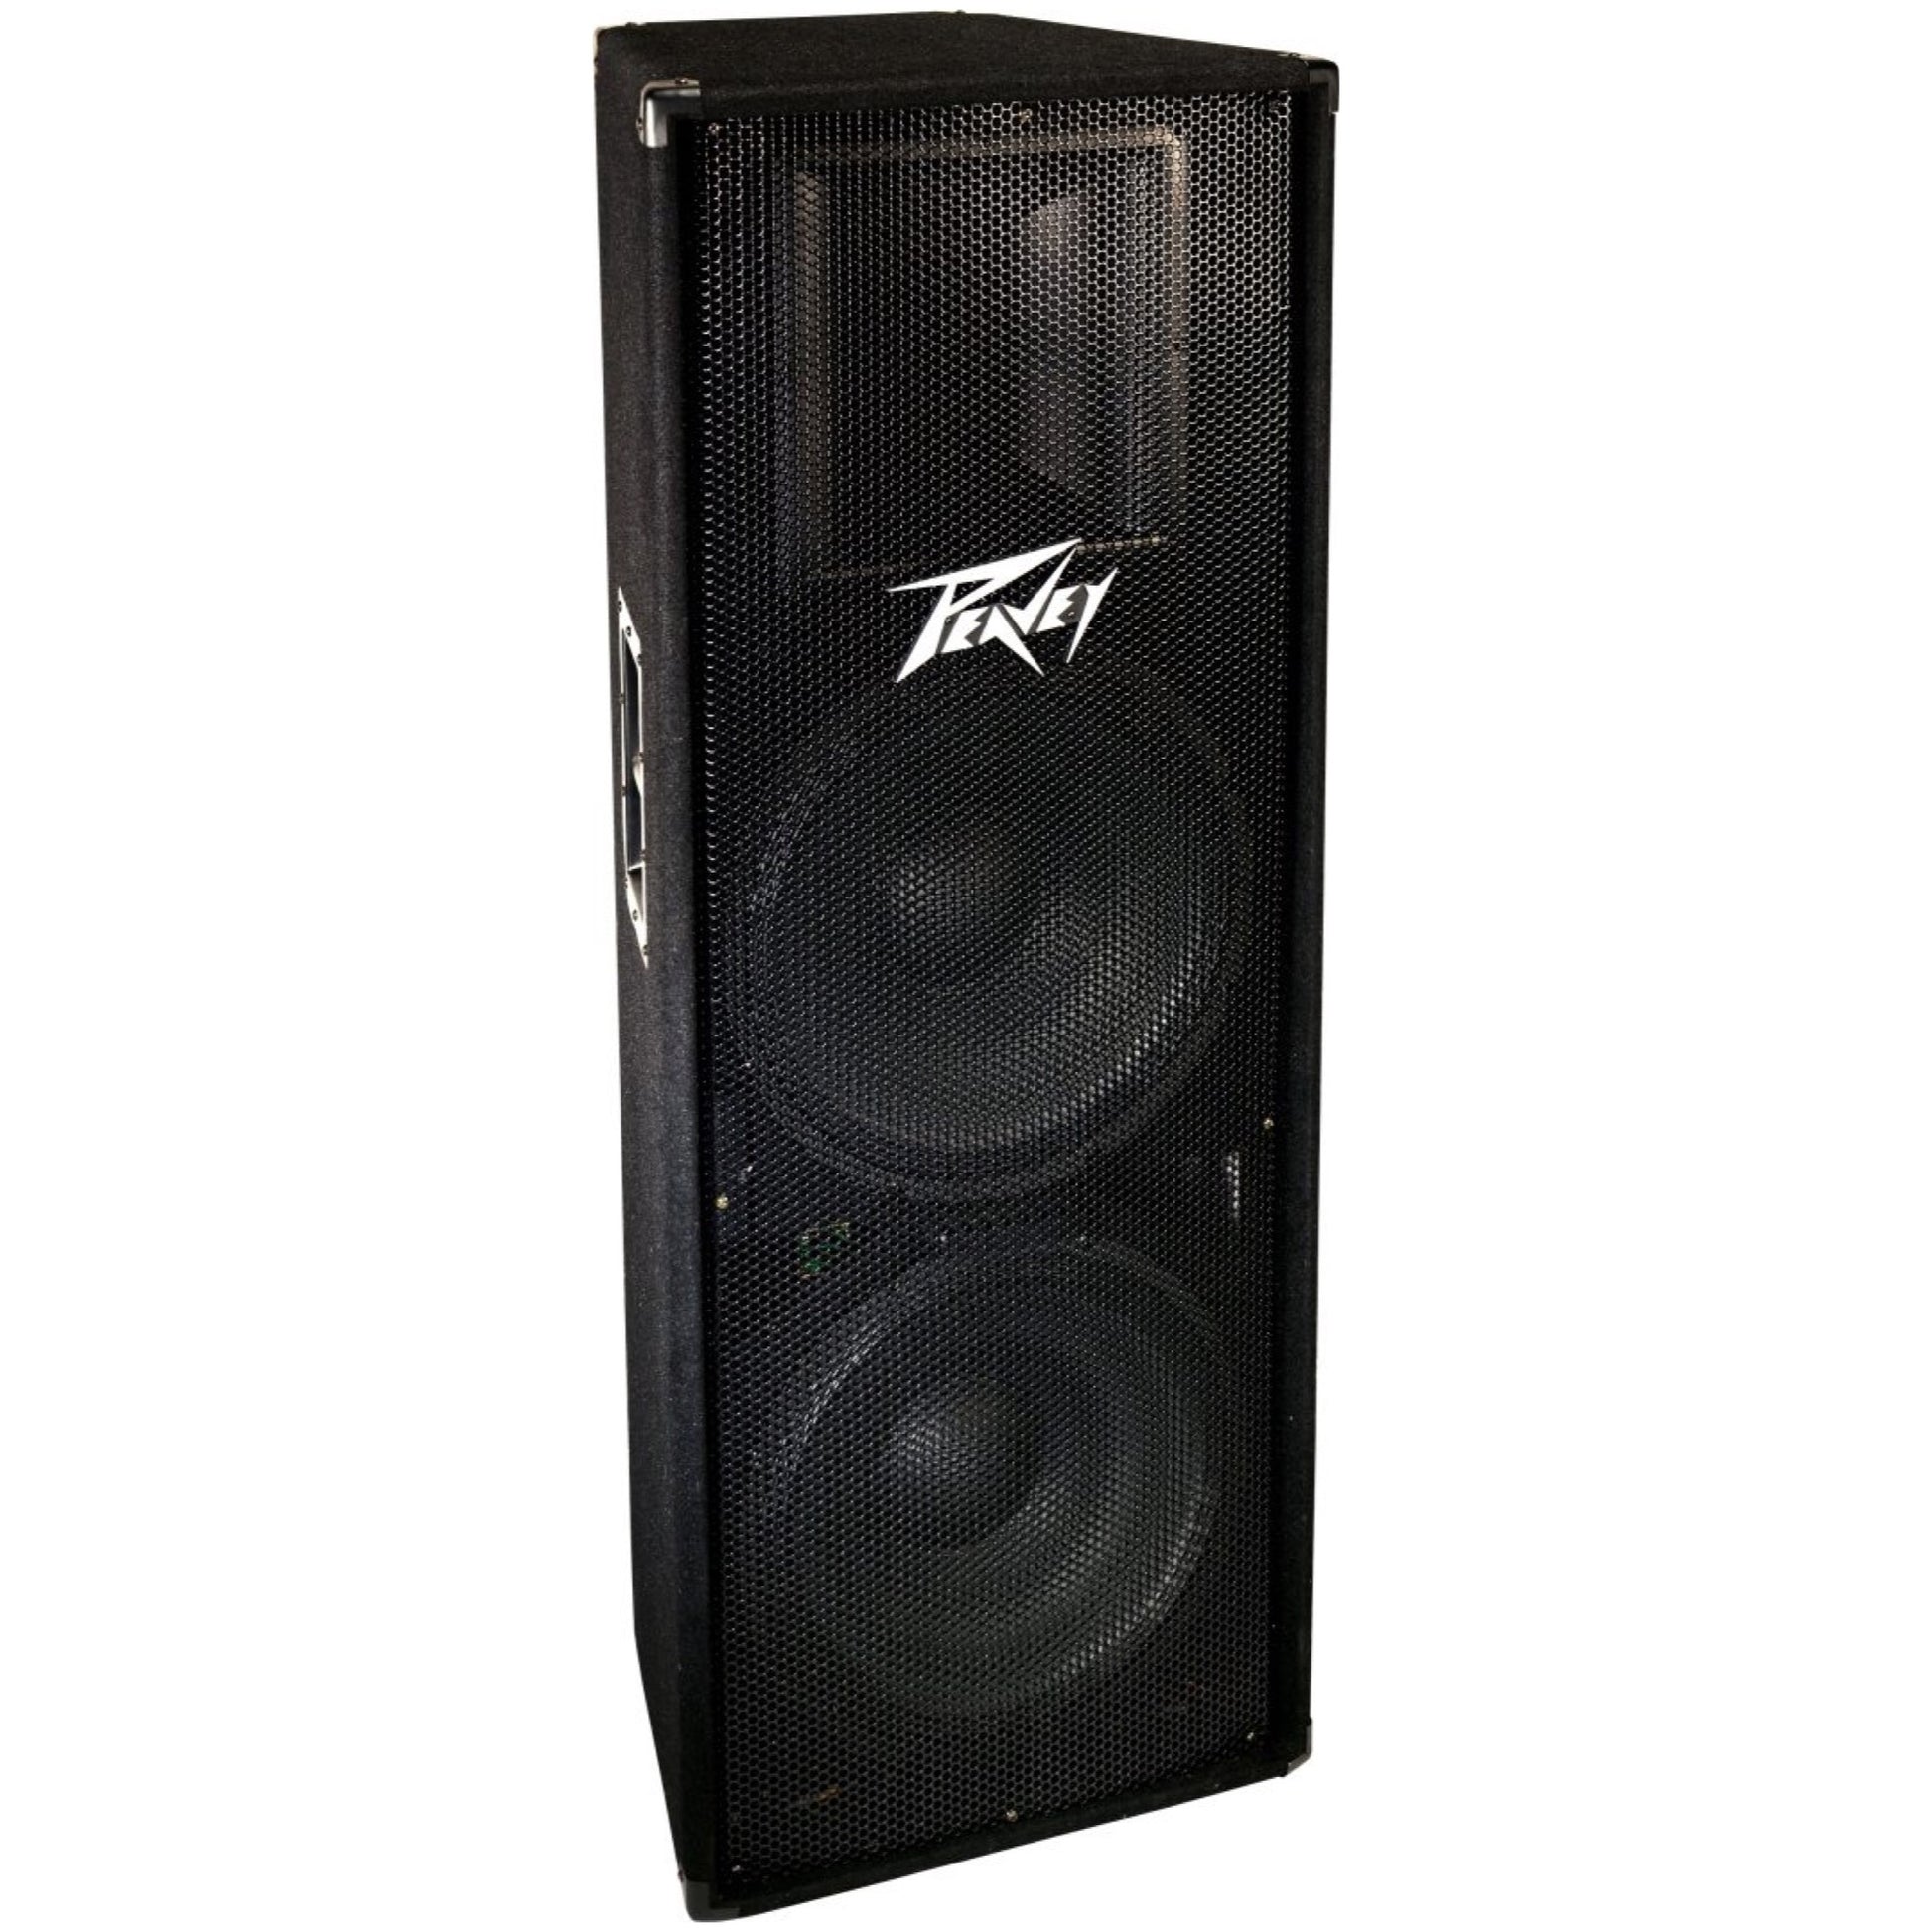 Peavey PV215 Passive, Unpowered PA Speaker (2x15 Inch), with Free CBI Speaker Cable (25 ft.)